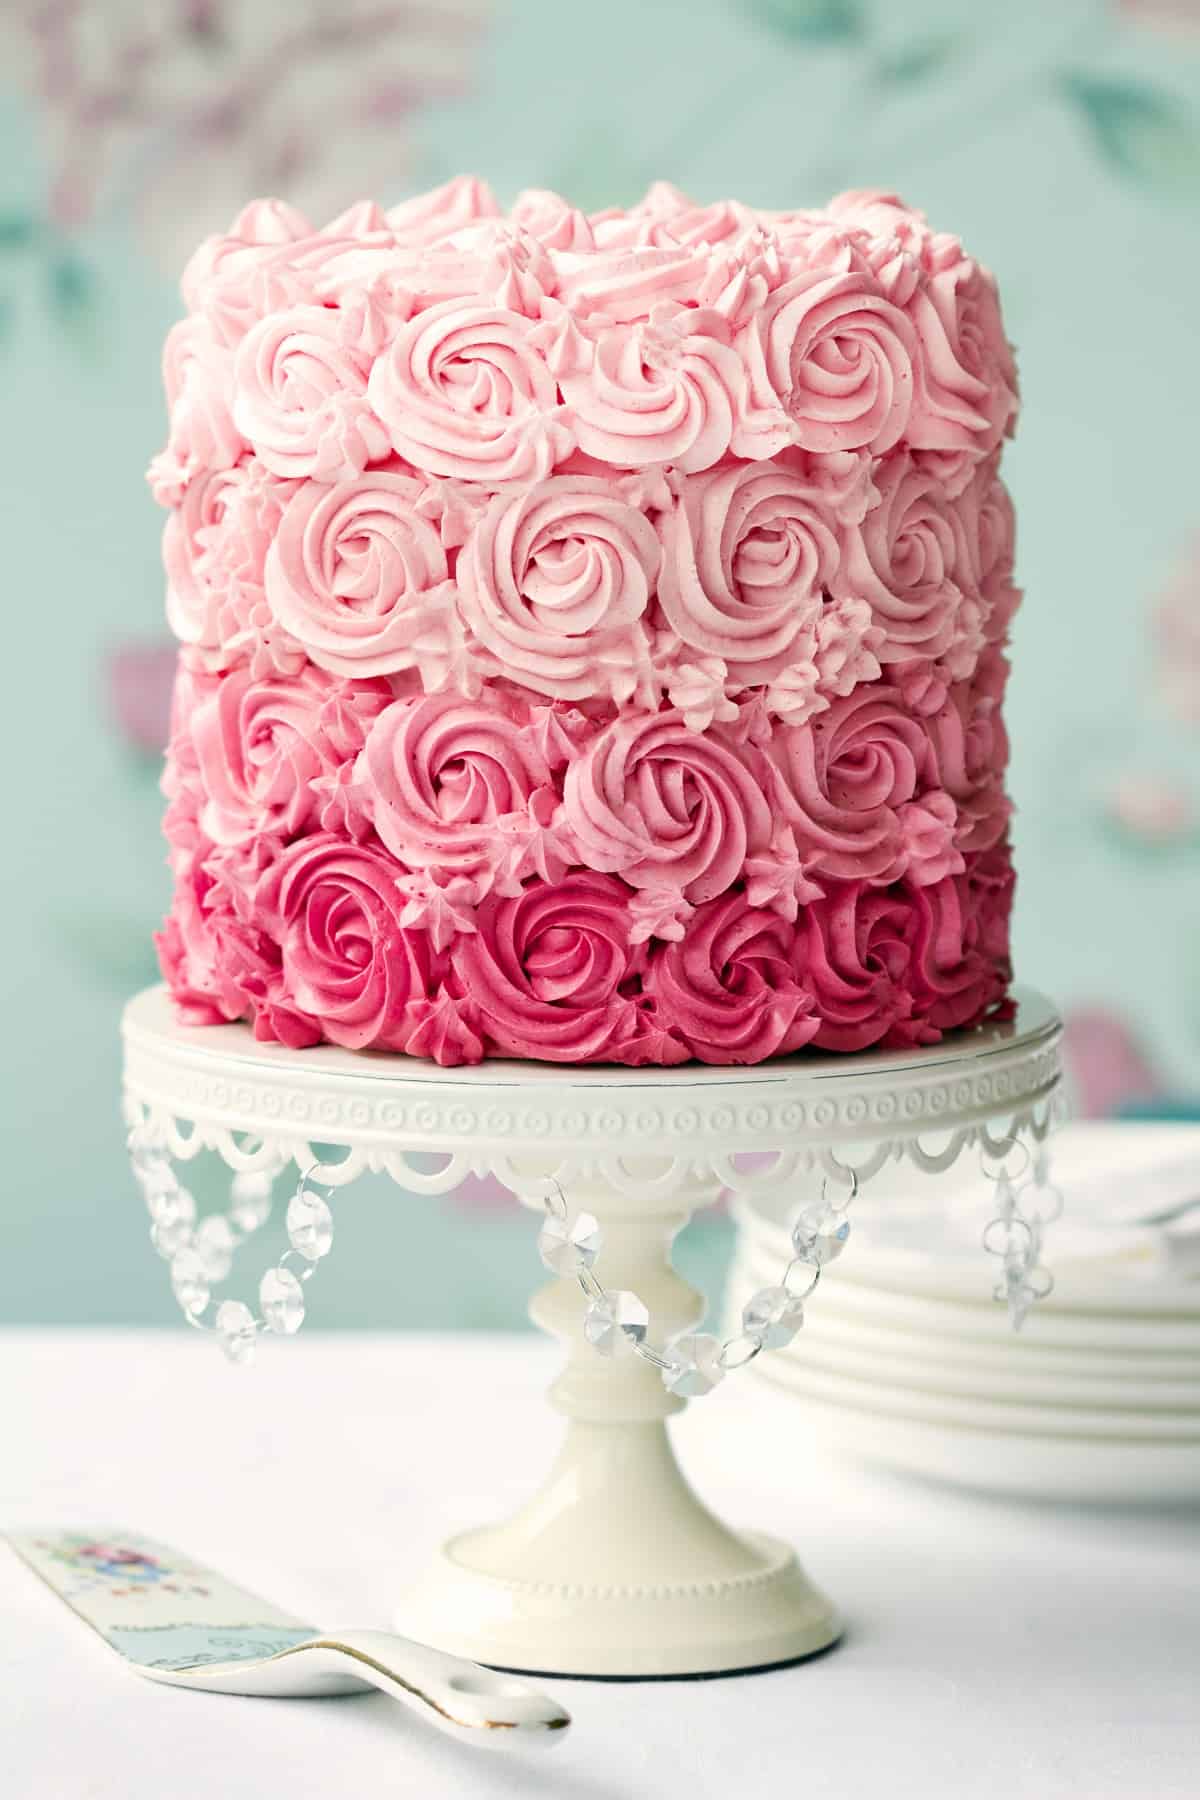 Cake with buttercream roses.